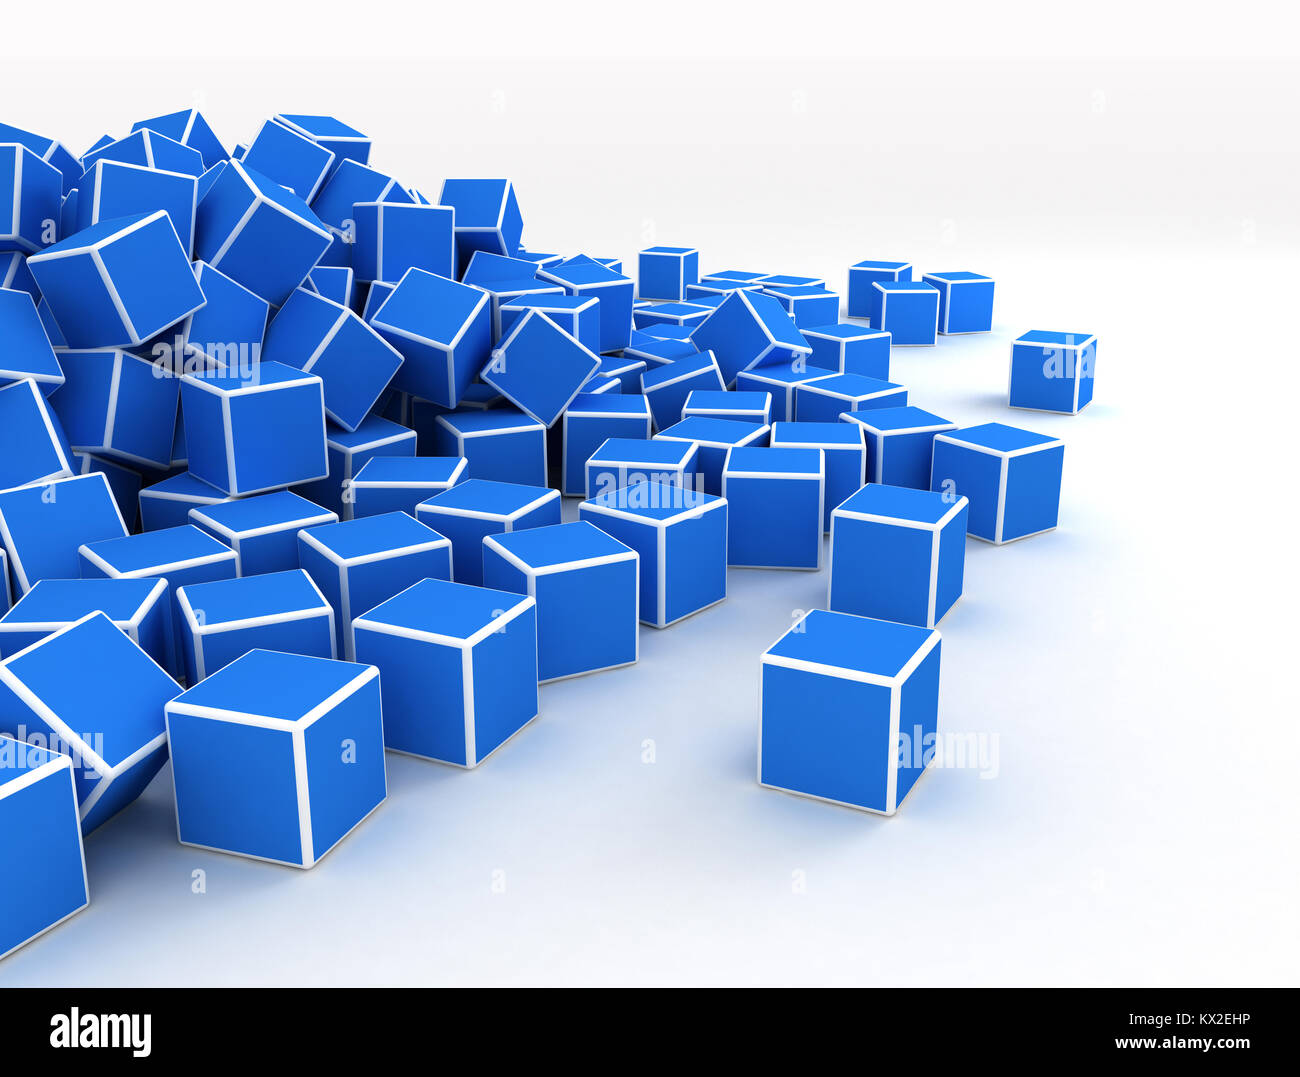 Blue 3d oulined cubes on white background Stock Photo